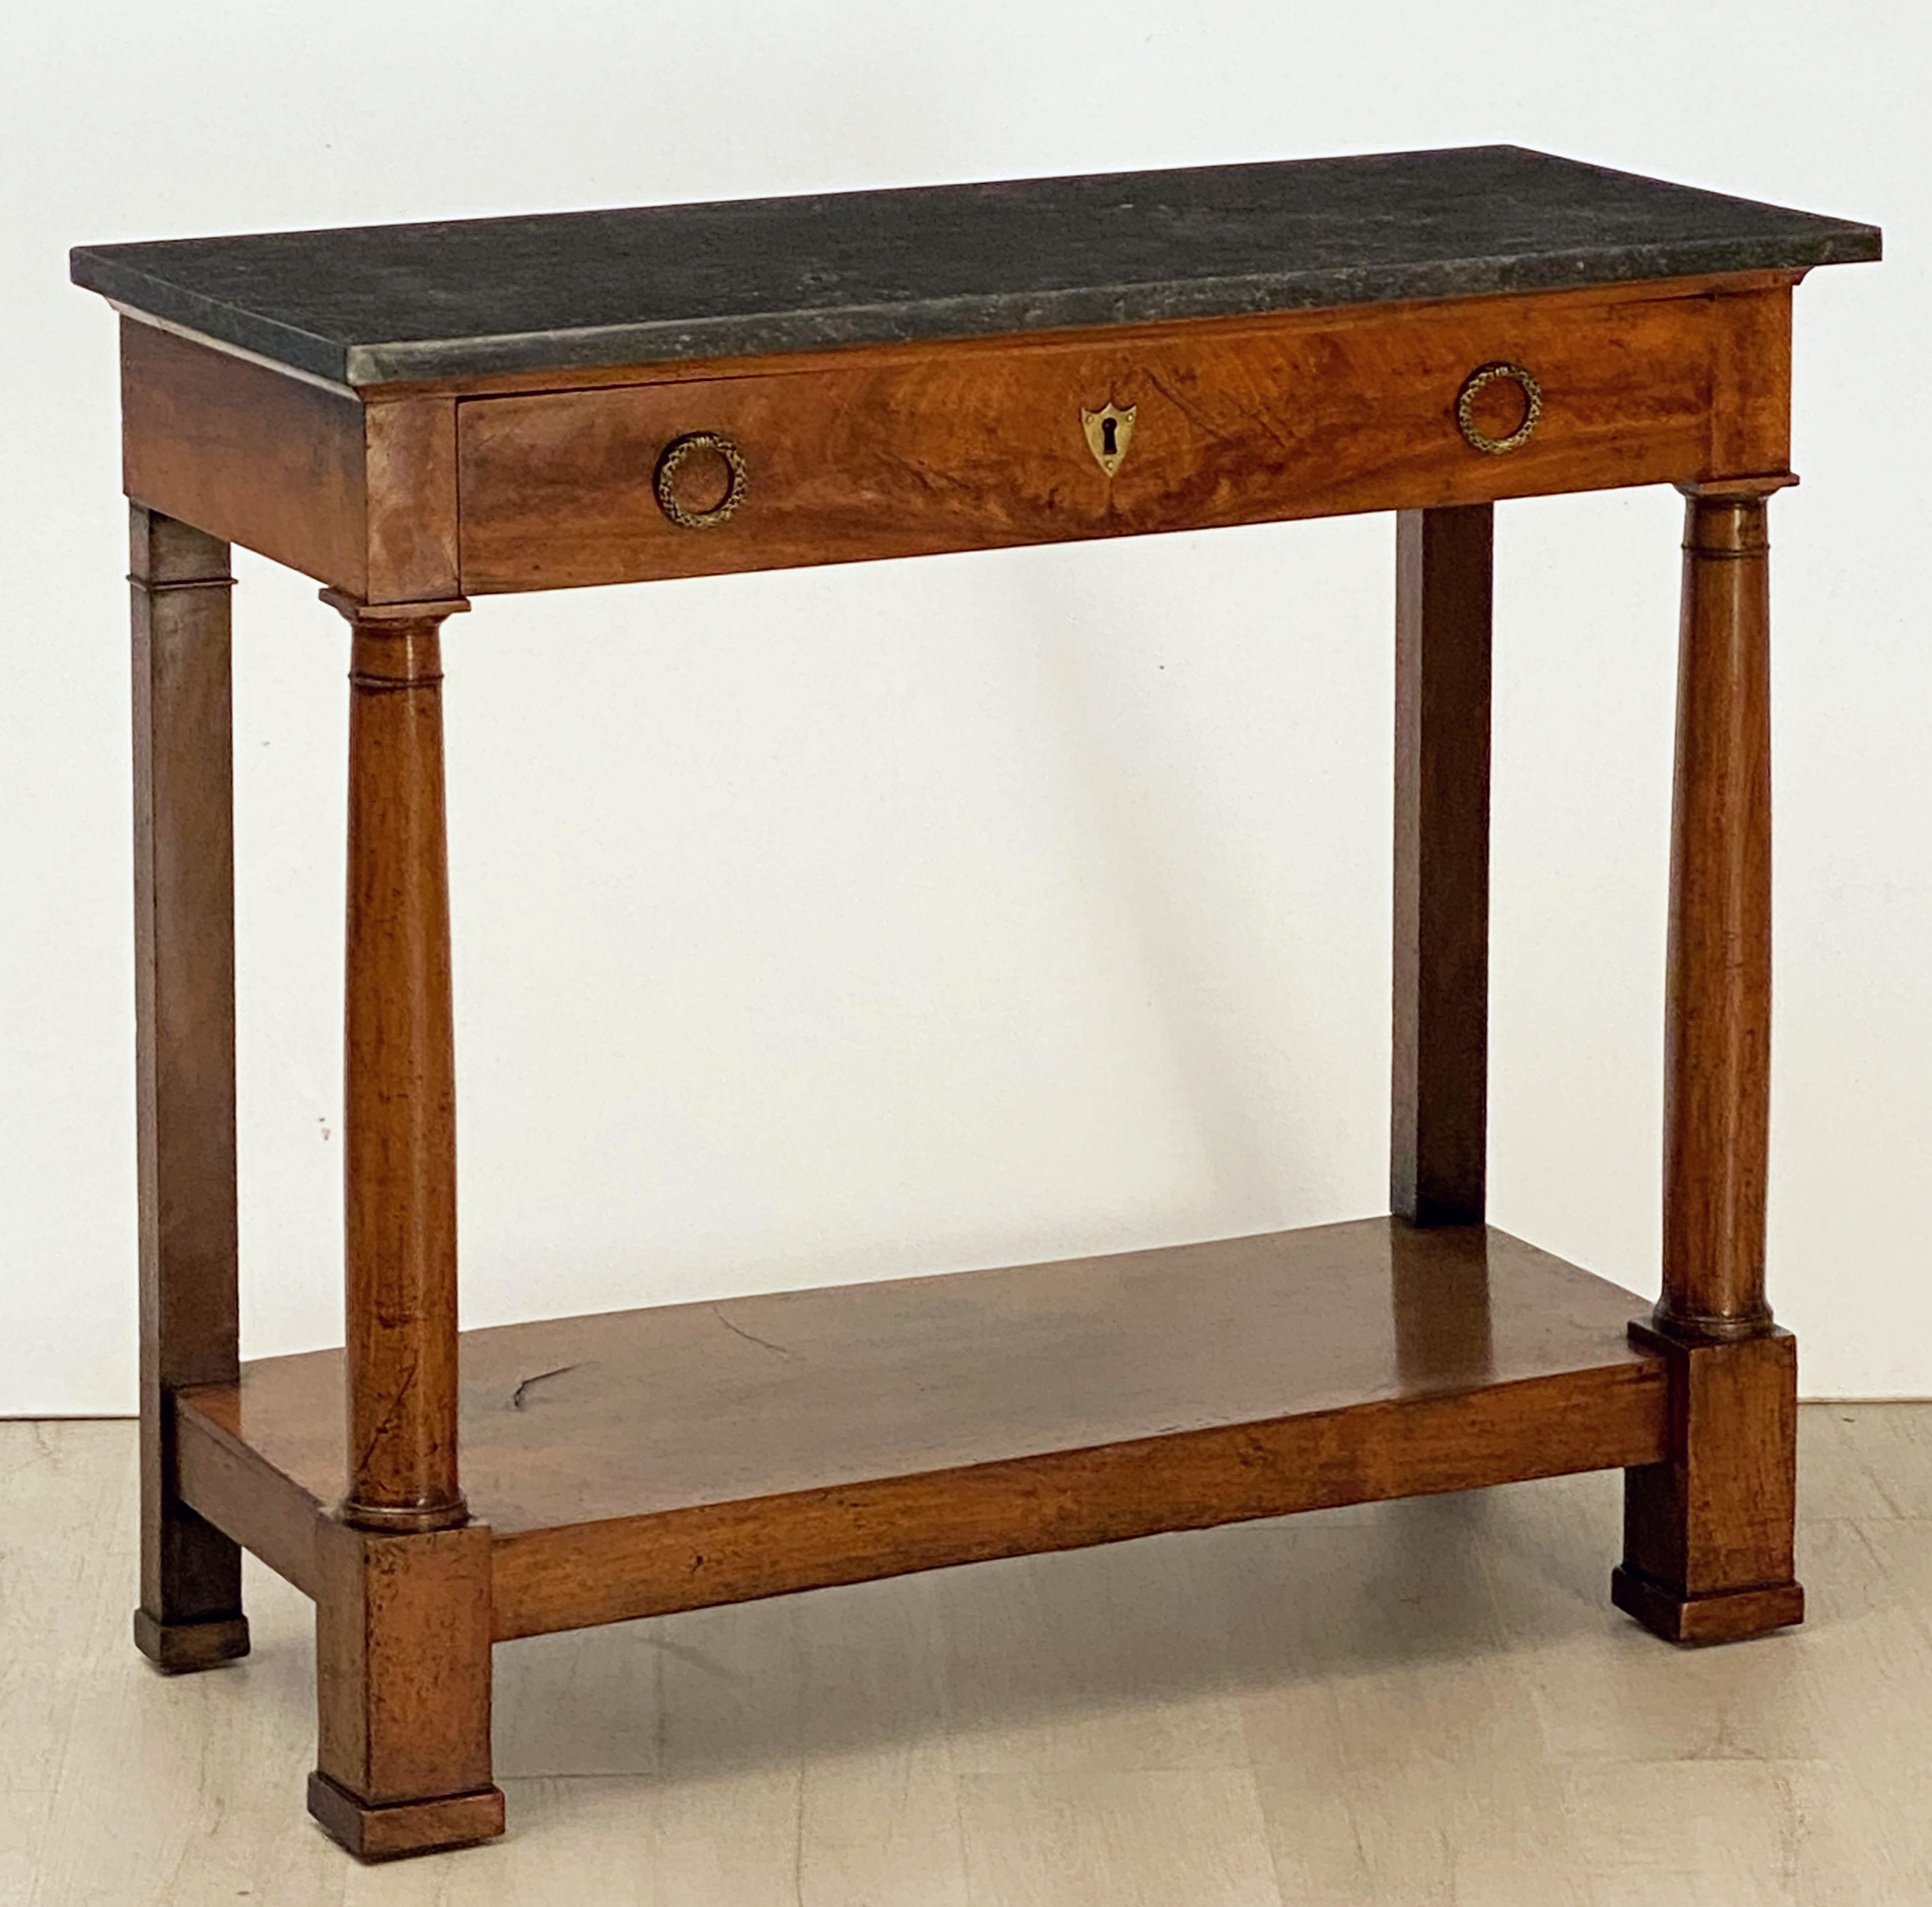 A period French Empire console table of mahogany of fine proportions, featuring a rectangular figured marble top set upon a frieze with one long drawer, the drawer with brass escutcheon and pulls, over a base with two facing turned column supports,